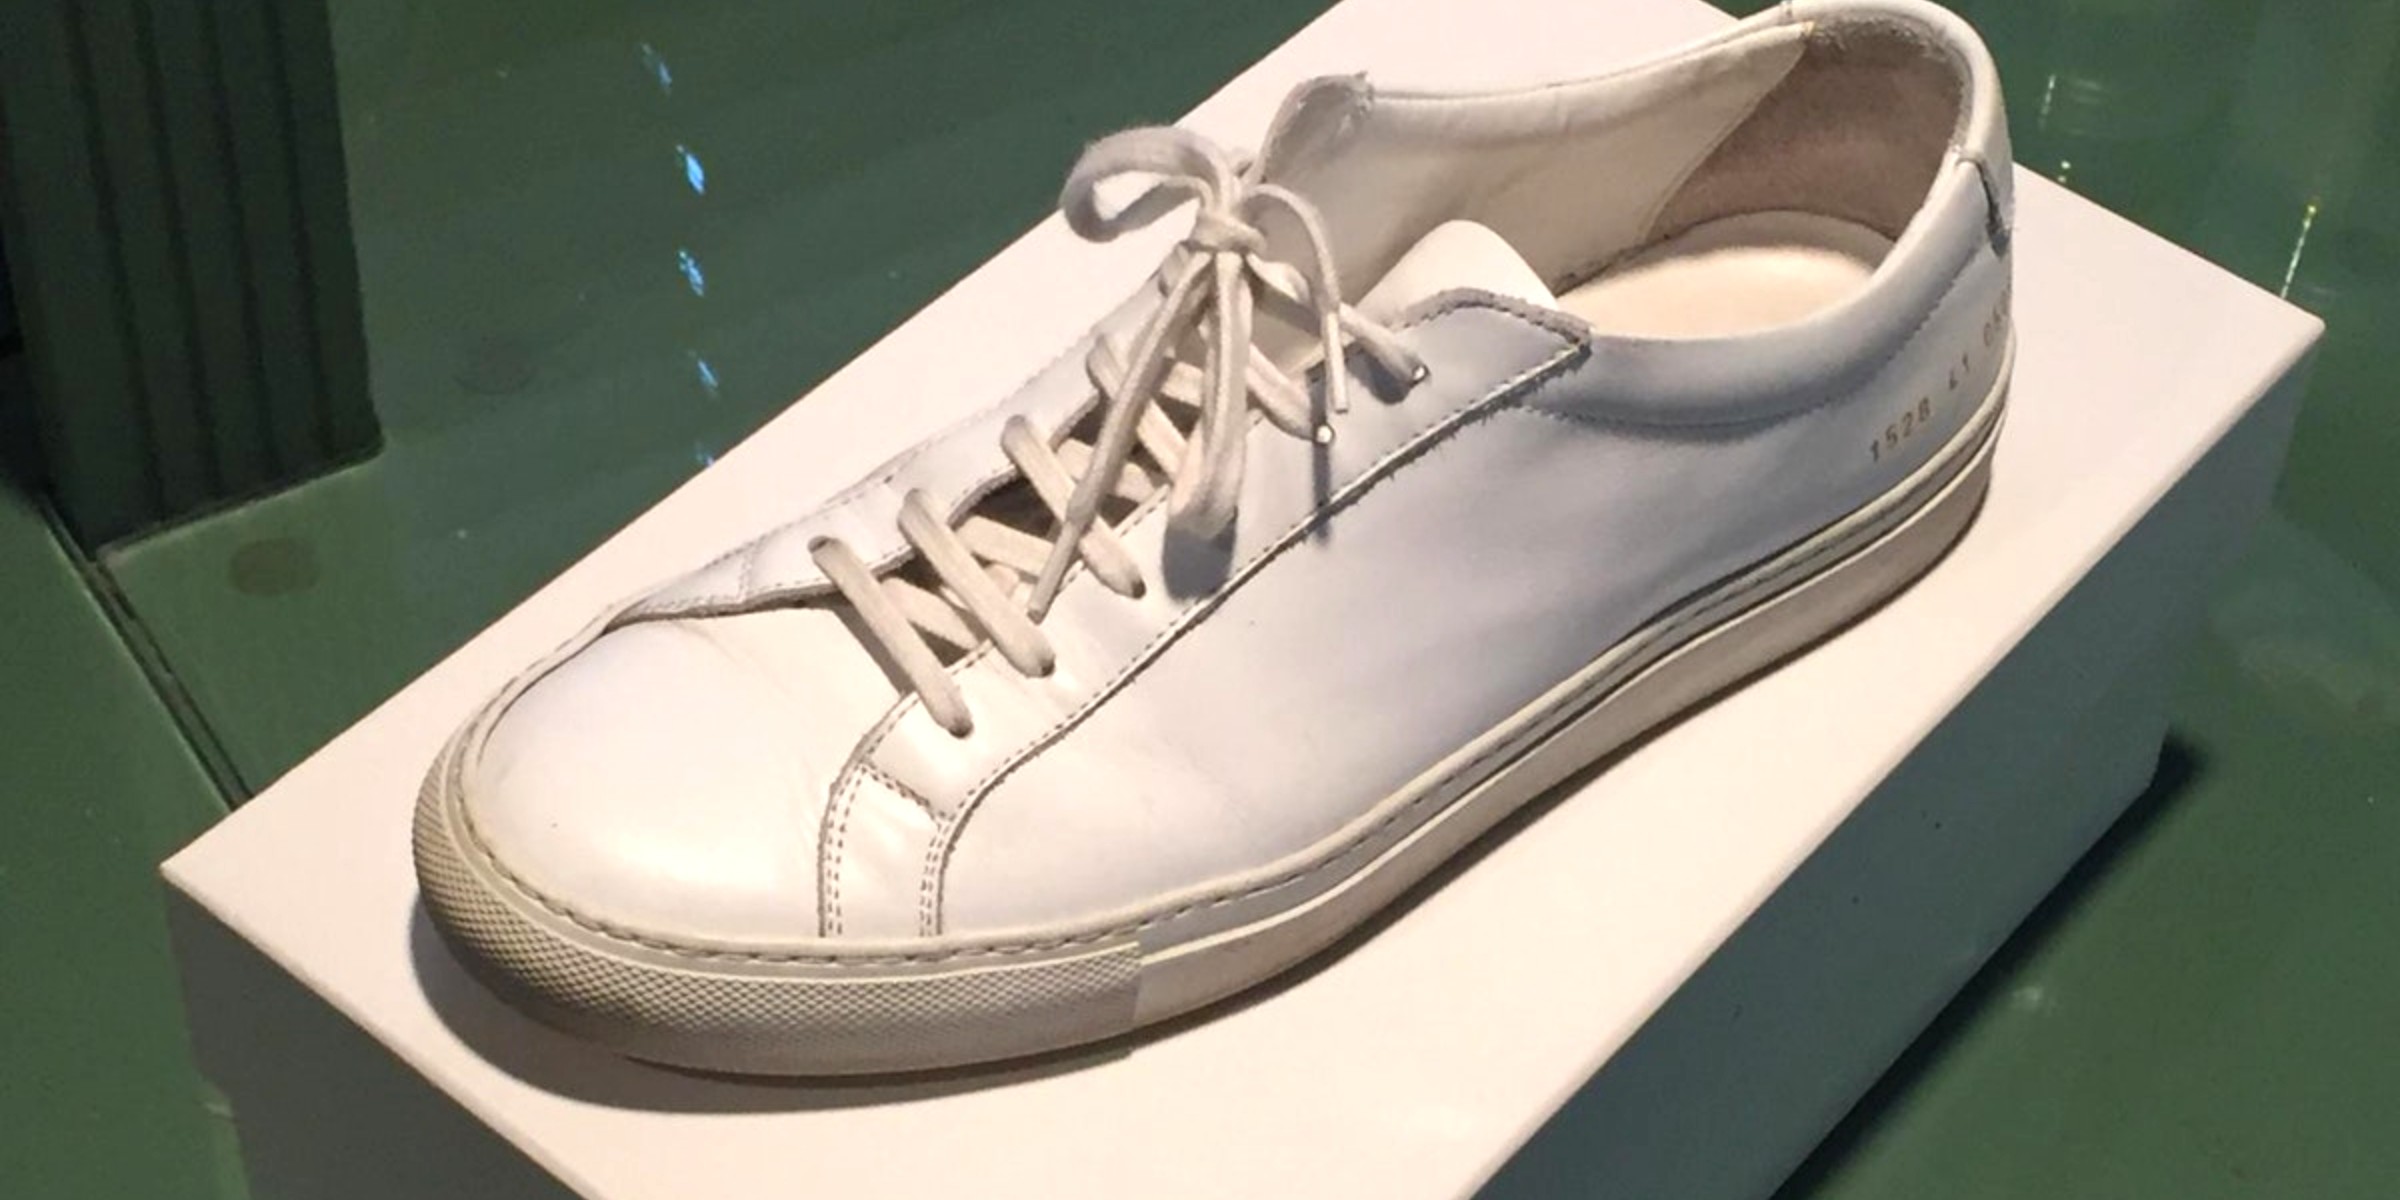 A Review Of The White Leather Sneaker That Started A Trend: The 